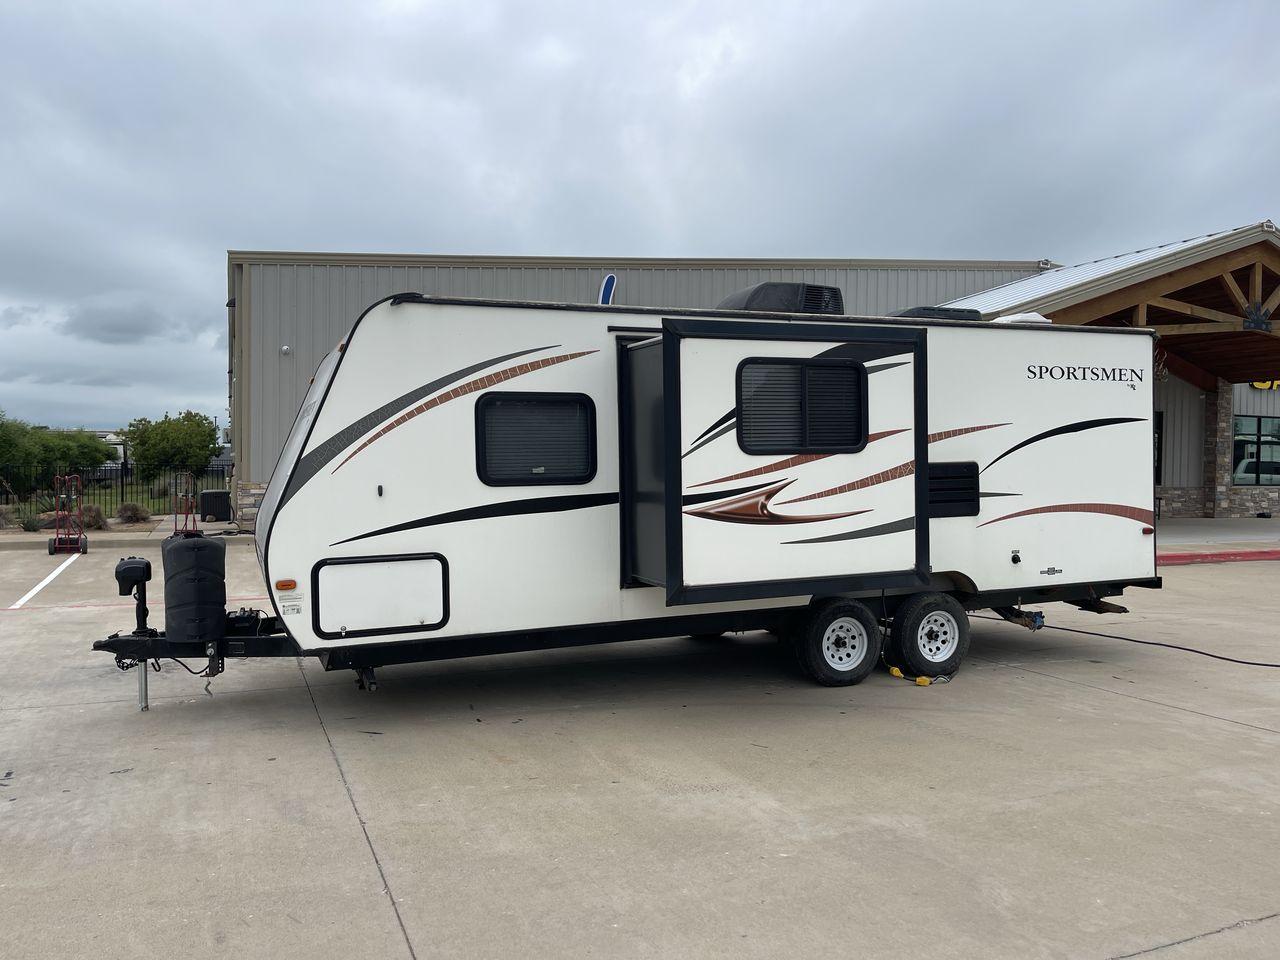 2015 WHITE 2015 KZ (4EZTU2428F5) , Length: 26.75 ft. | Dry Weight: 4,480 lbs. | Gross Weight: 6,000 lbs. | Slides: 1 transmission, located at 4319 N Main Street, Cleburne, TX, 76033, (817) 221-0660, 32.435829, -97.384178 - The 2015 KZ Sportsmen 242 measures 26.75 ft. in length. It has a dry weight of 4,480 lbs. and a GVWR of 6,000 lbs. It has an automatic heating and cooling rate of 20,000 and 13,500 BTUs, respectively. It is a lightweight, easy-to-tow travel trailer. Inside, you will find two twin-sized rear bunk bed - Photo #24